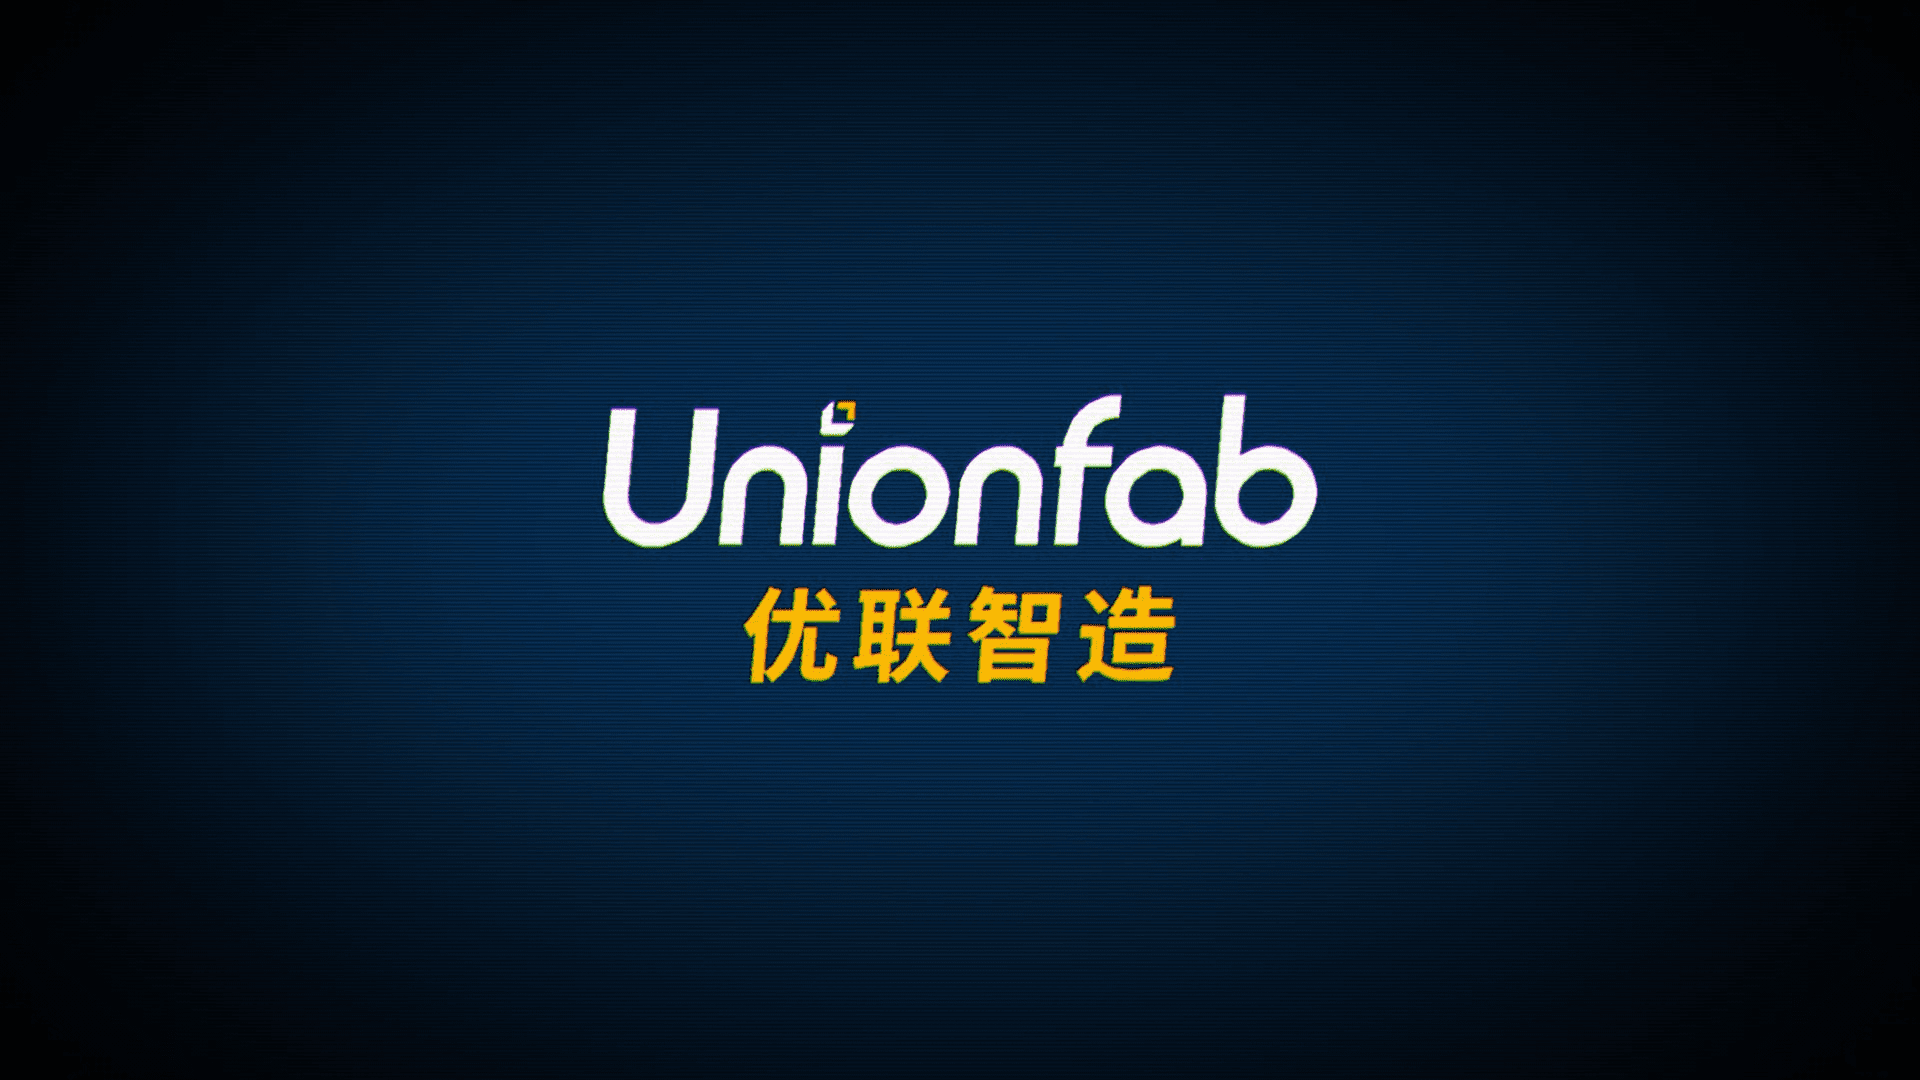 How to Work with Unionfab